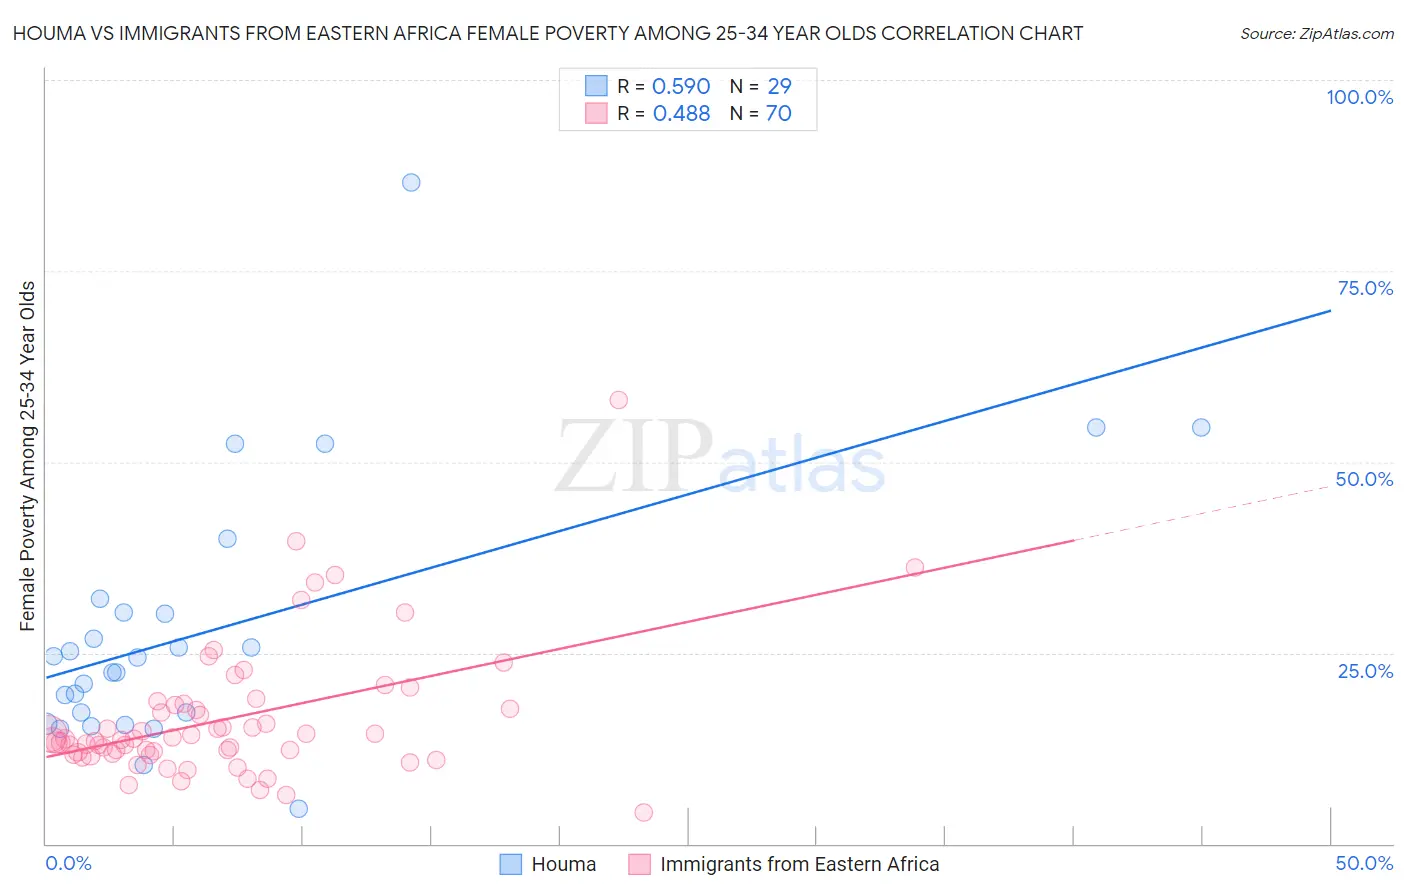 Houma vs Immigrants from Eastern Africa Female Poverty Among 25-34 Year Olds